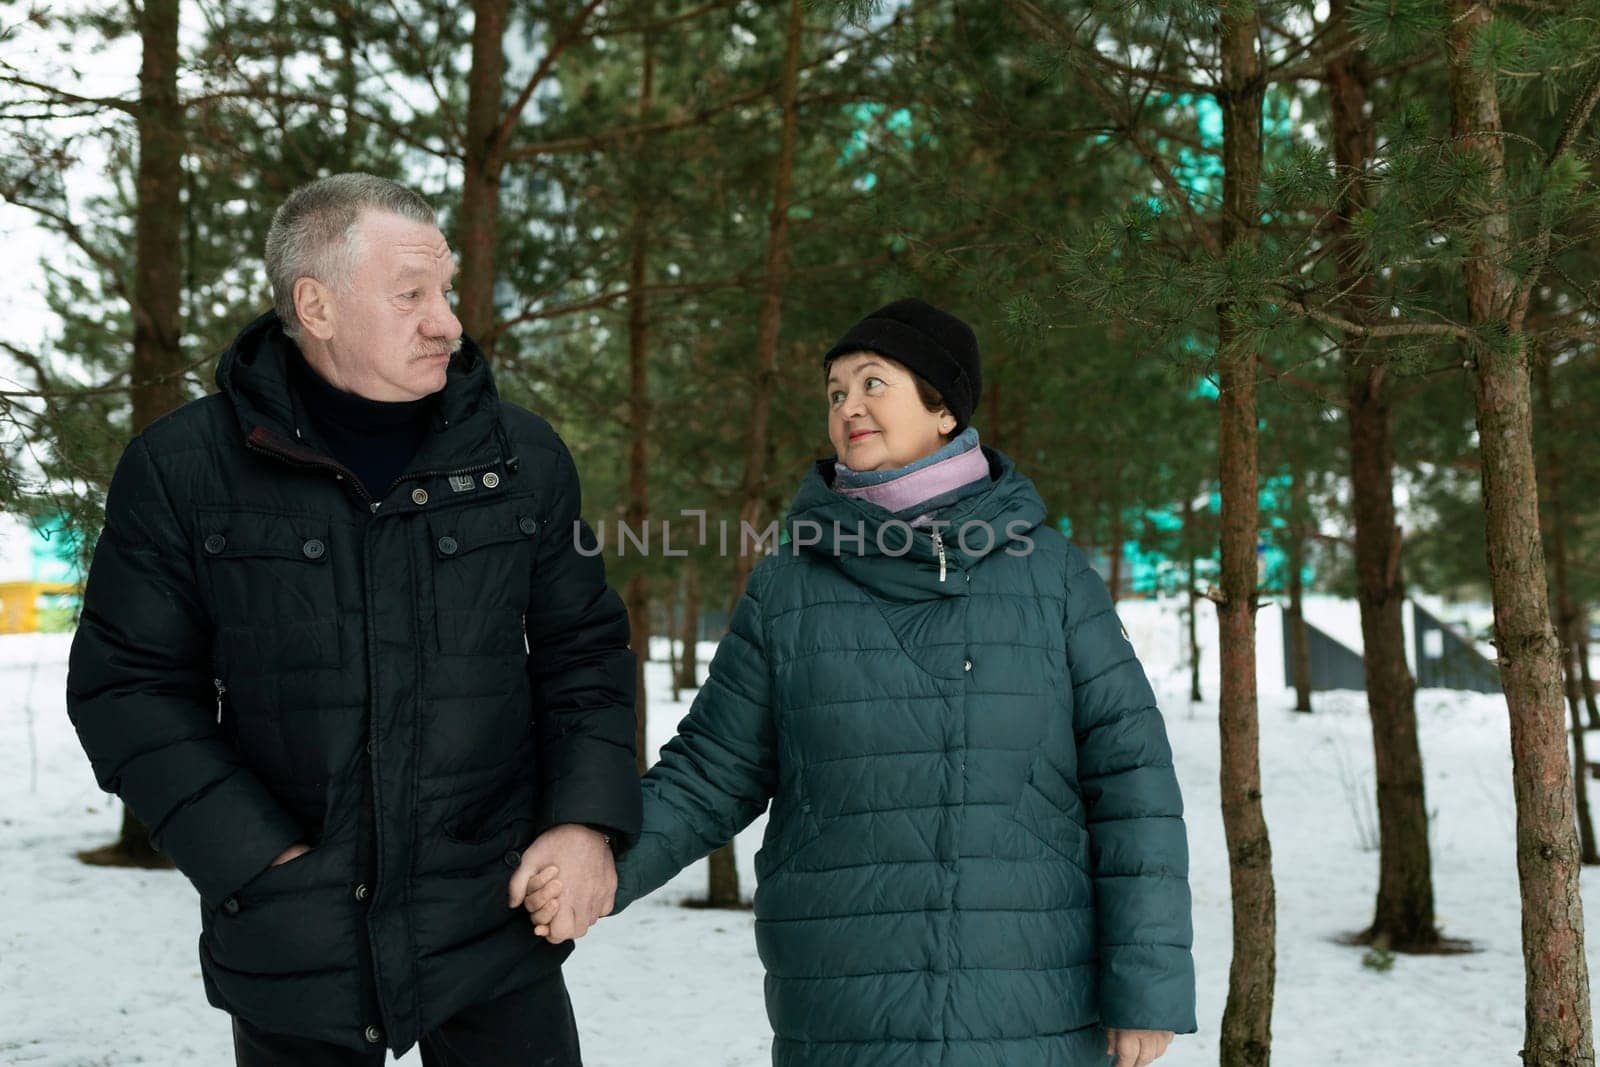 Cute mature couple experiencing love for each other while walking in the park in winter.